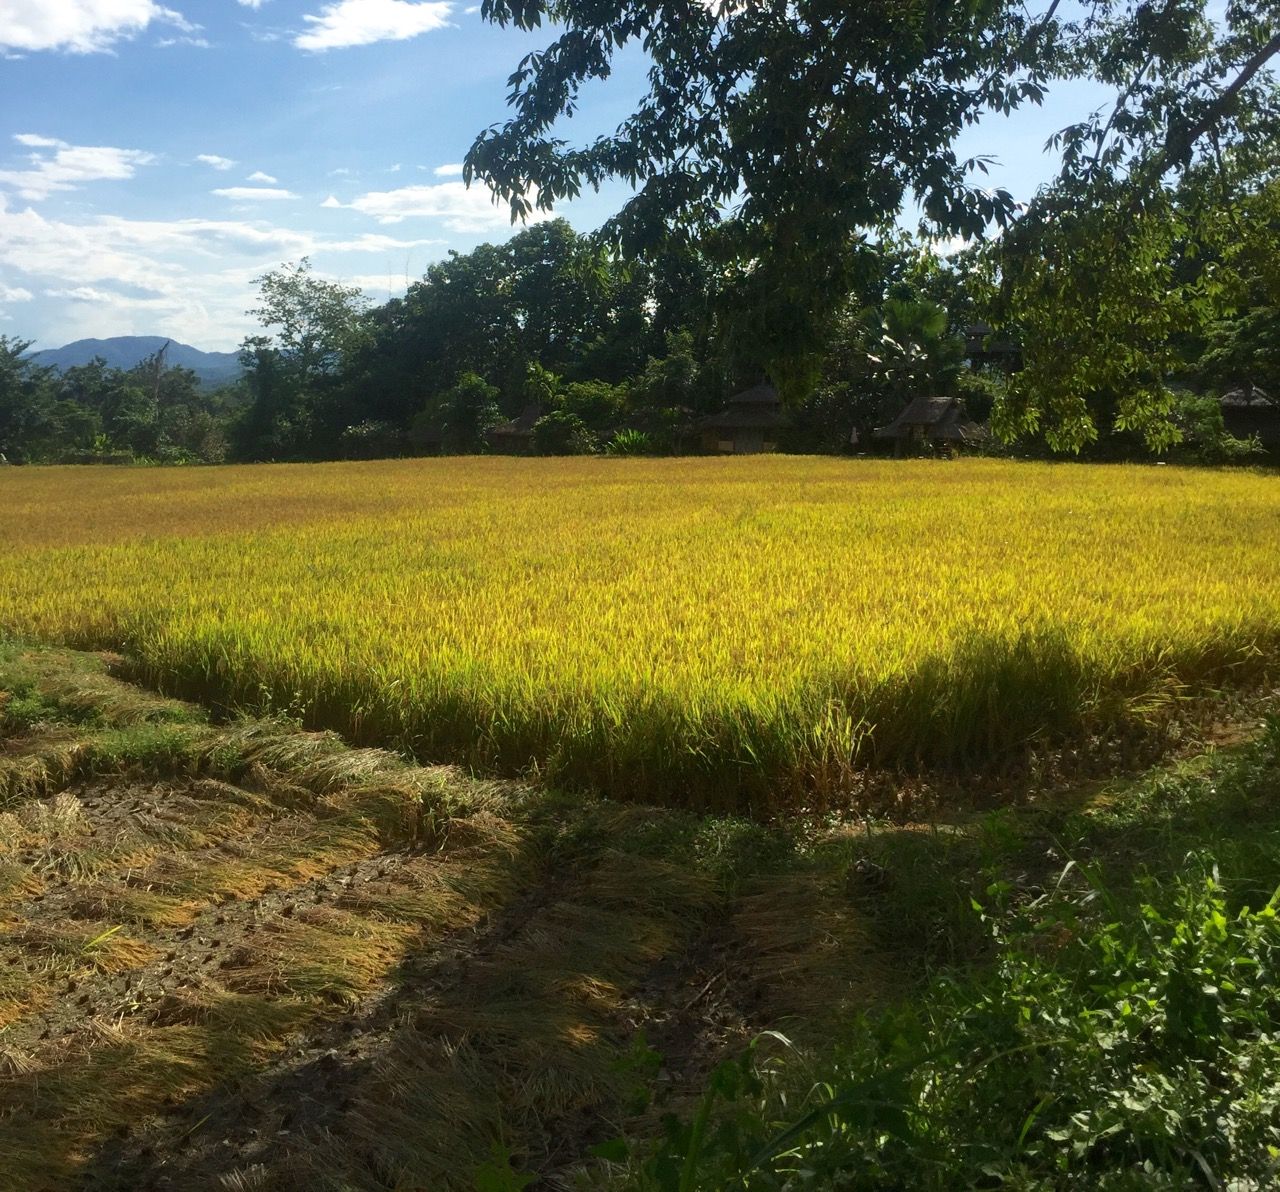 Rice ready for harvest. The field is partially harvested.